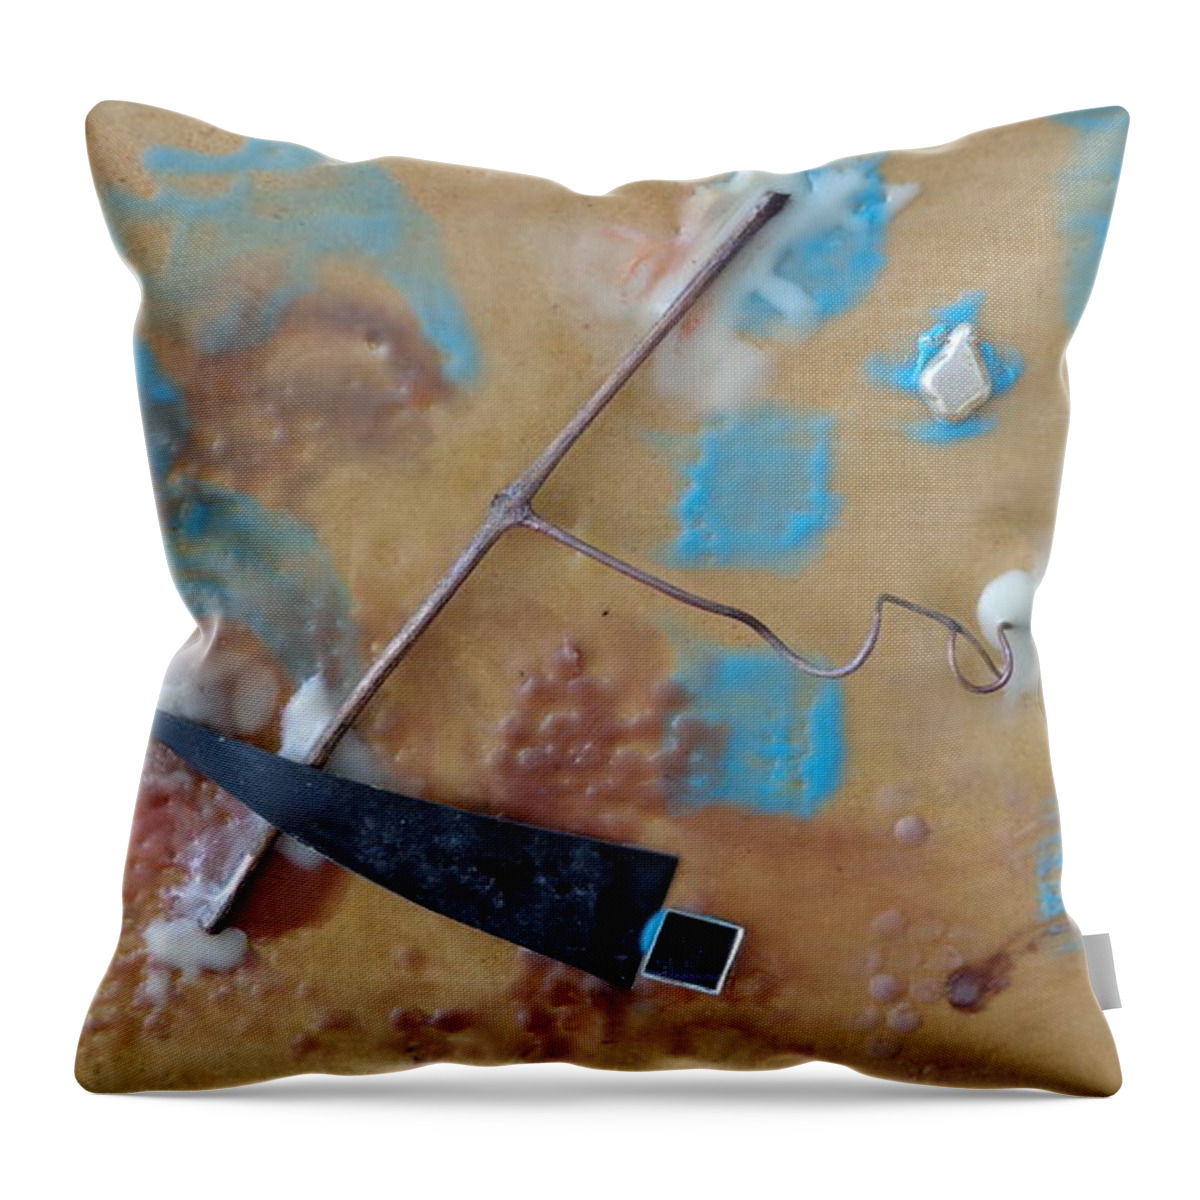 Bettye Harwell Encaustic Wax Throw Pillow featuring the mixed media Nature and Metal by Bettye Harwell